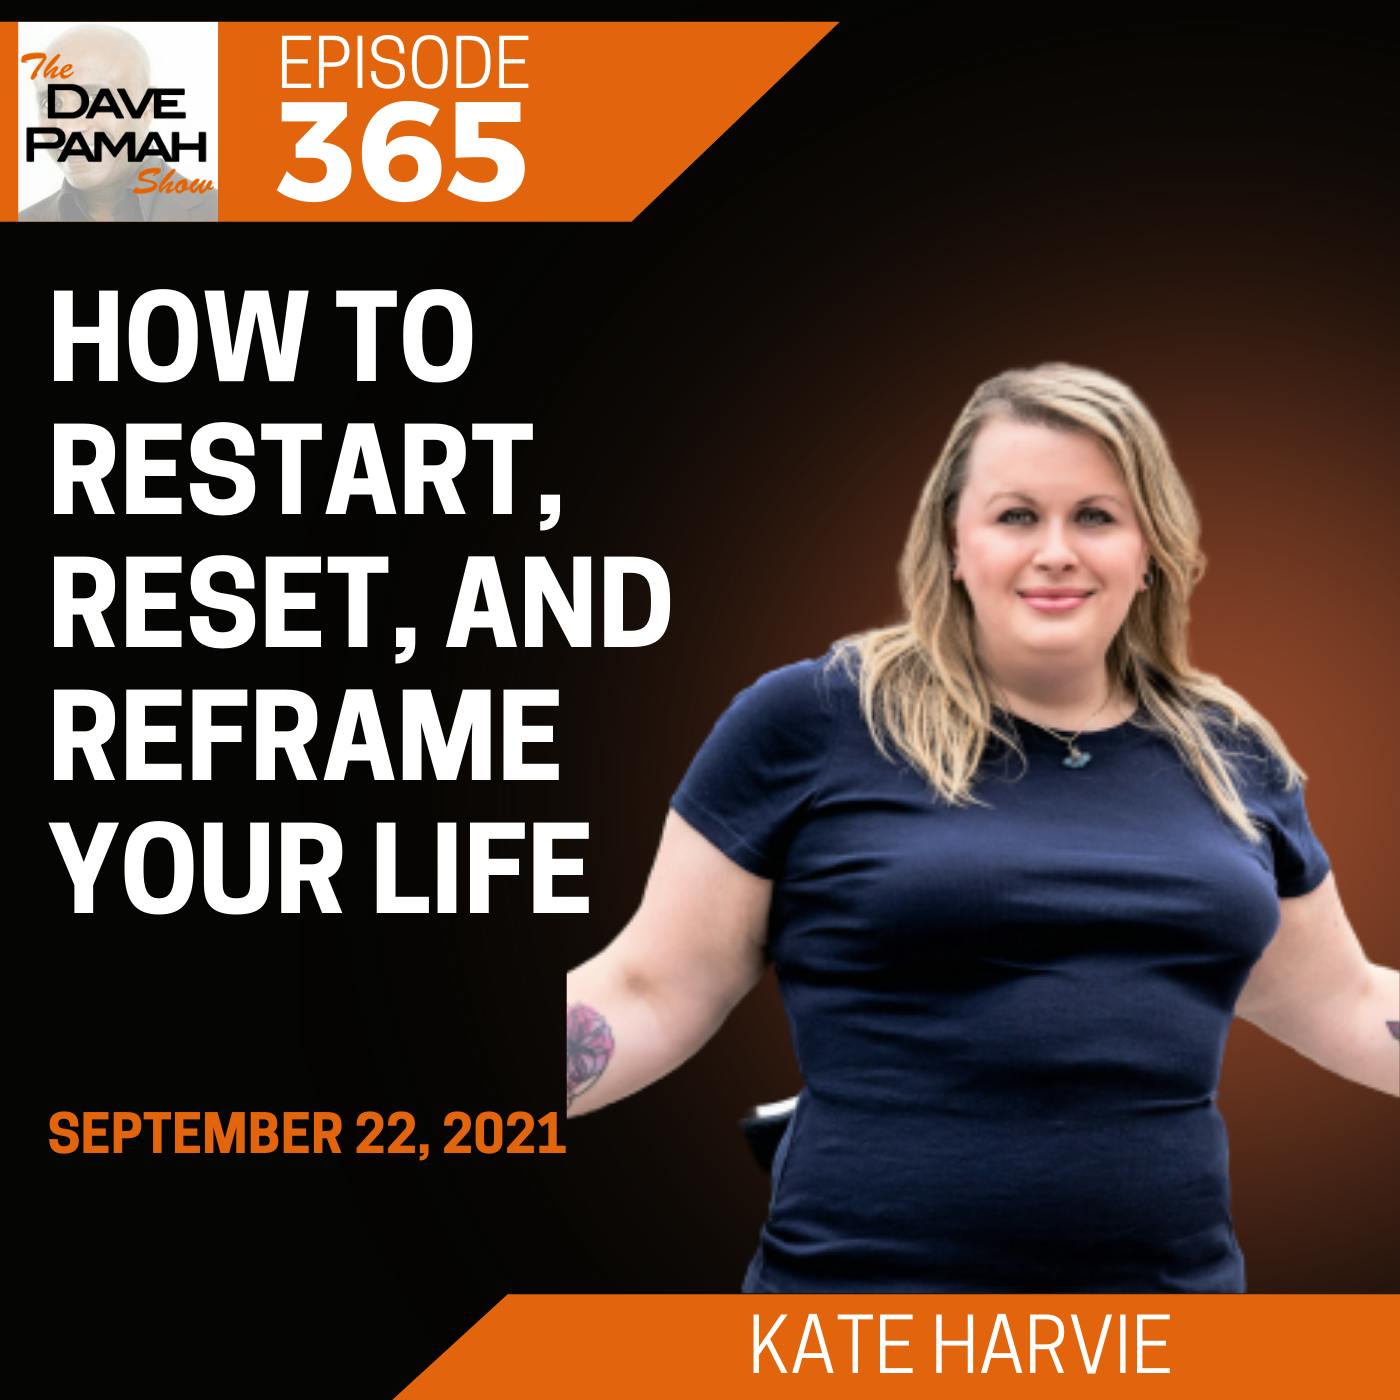 How to Restart, Reset, and Reframe Your Life with Kate Harvie